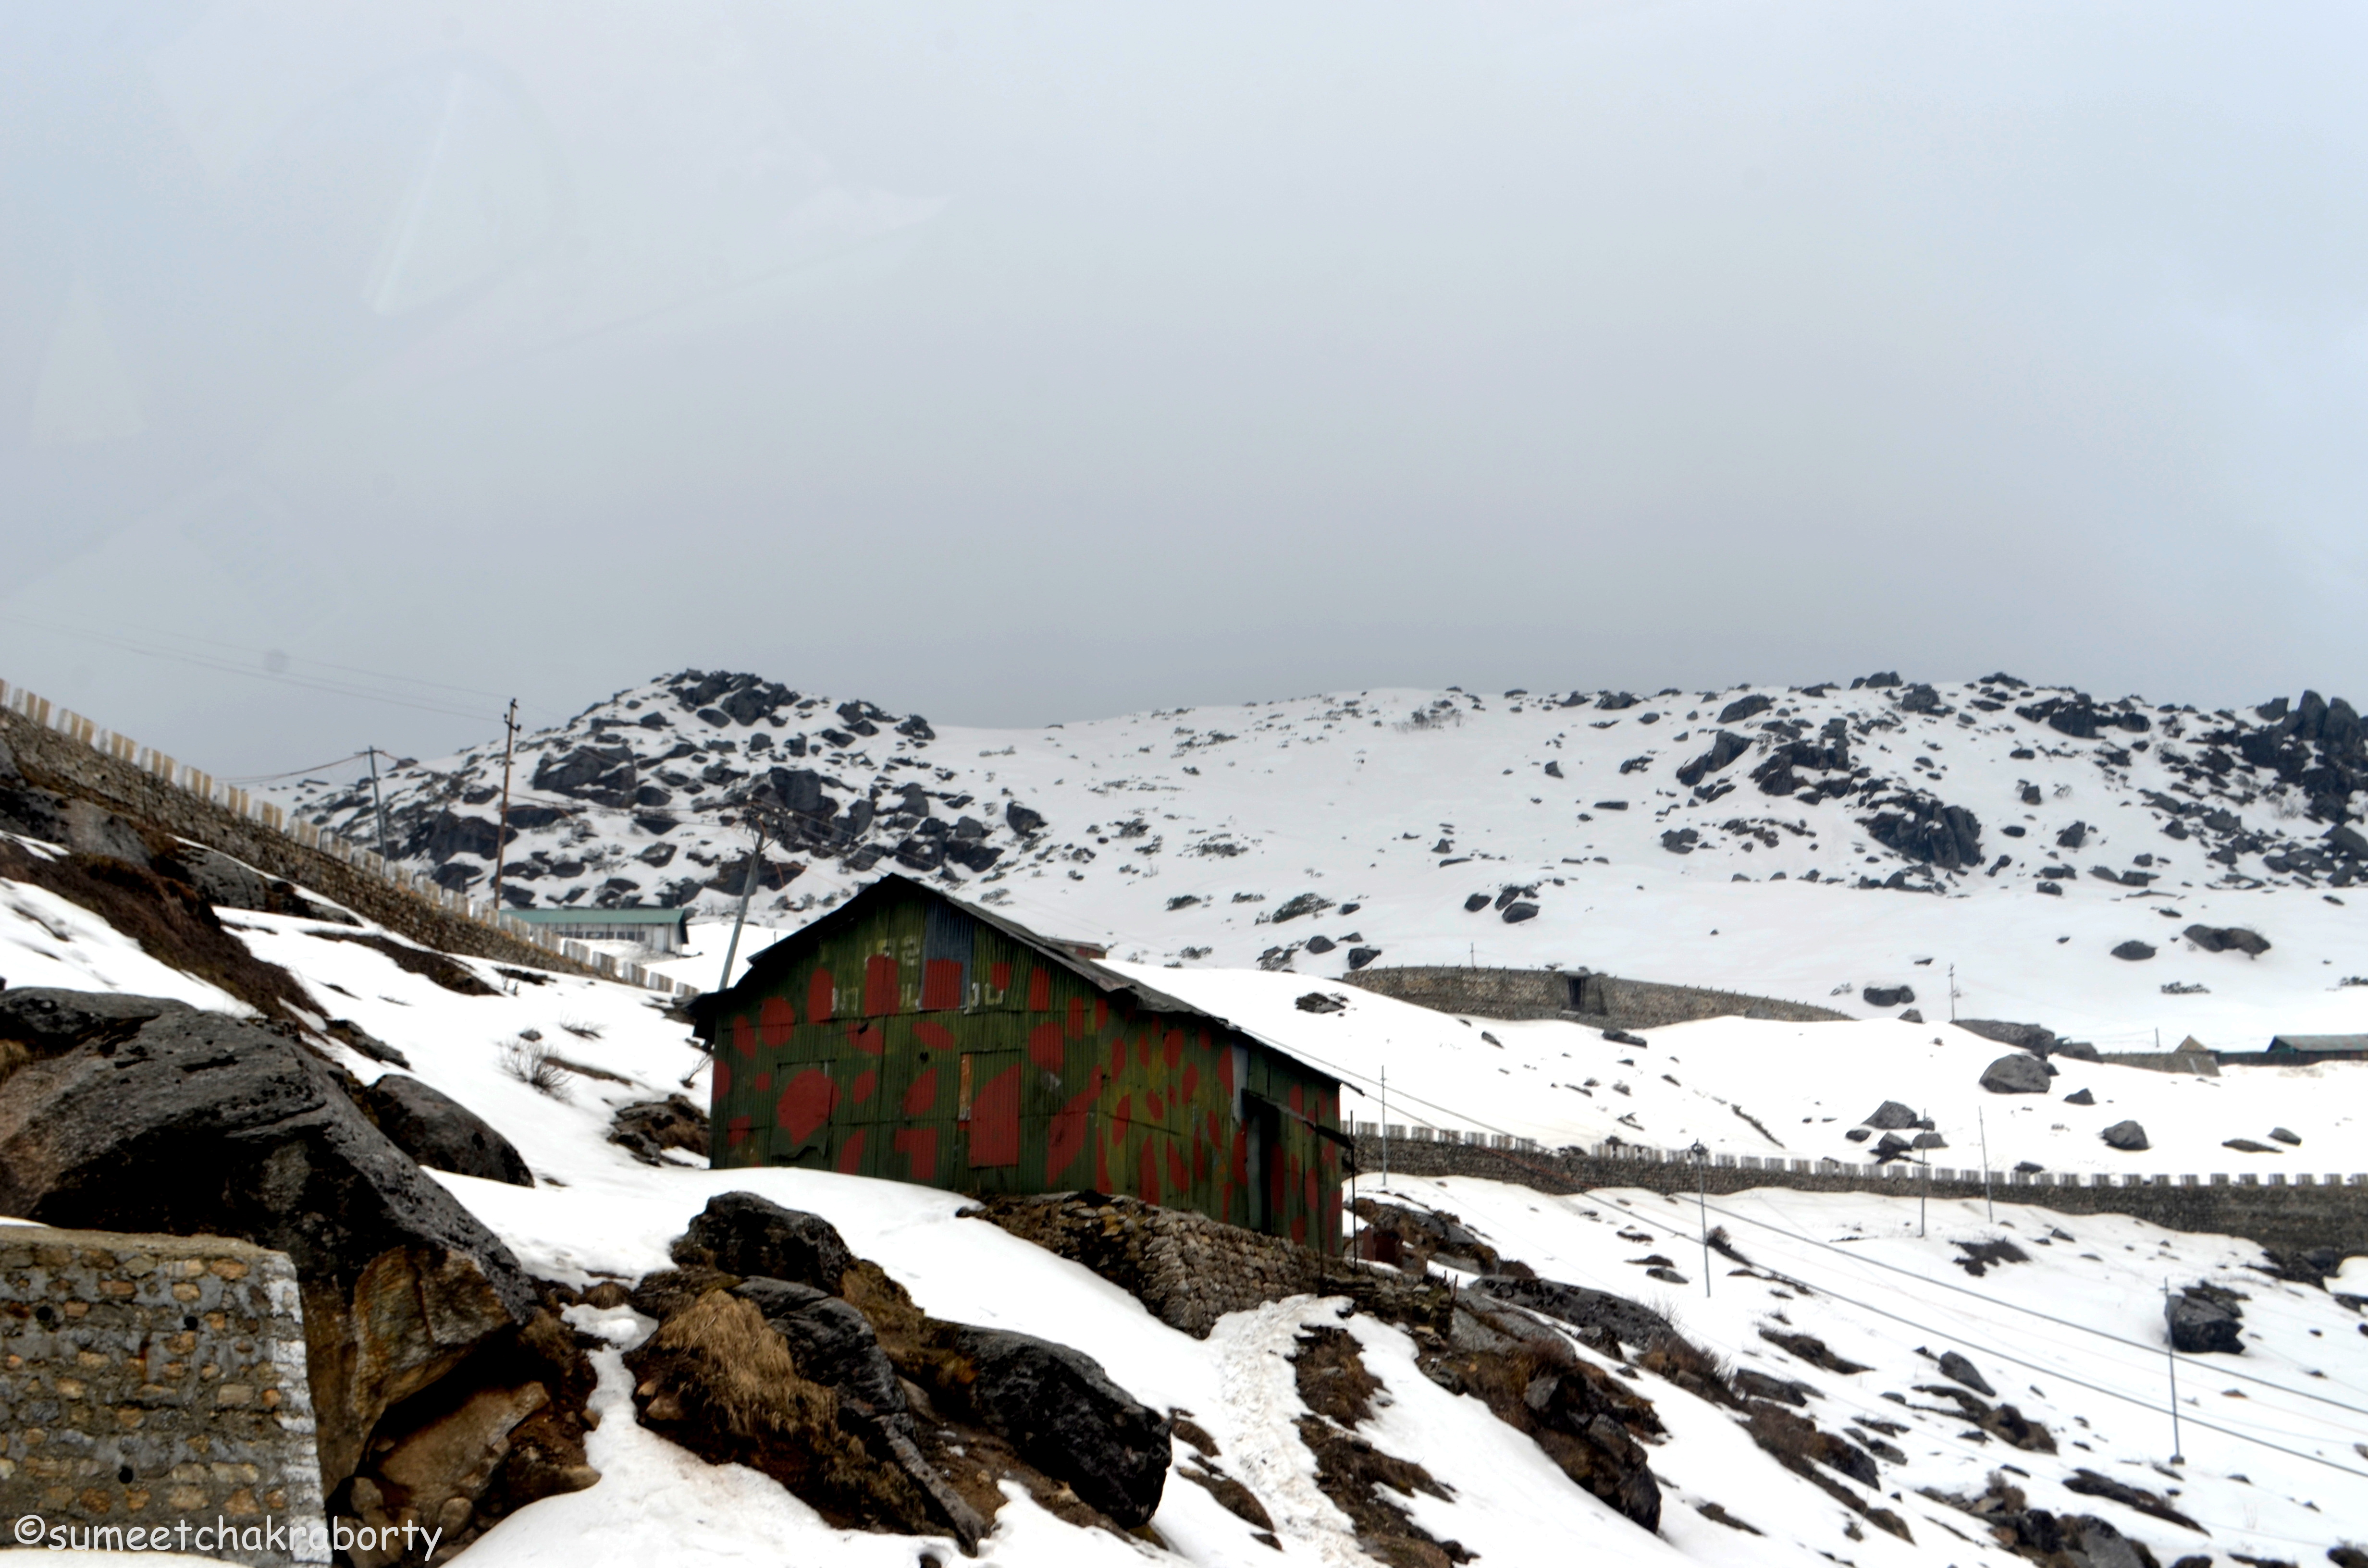 Nathu La – A journey to an ancient silk route